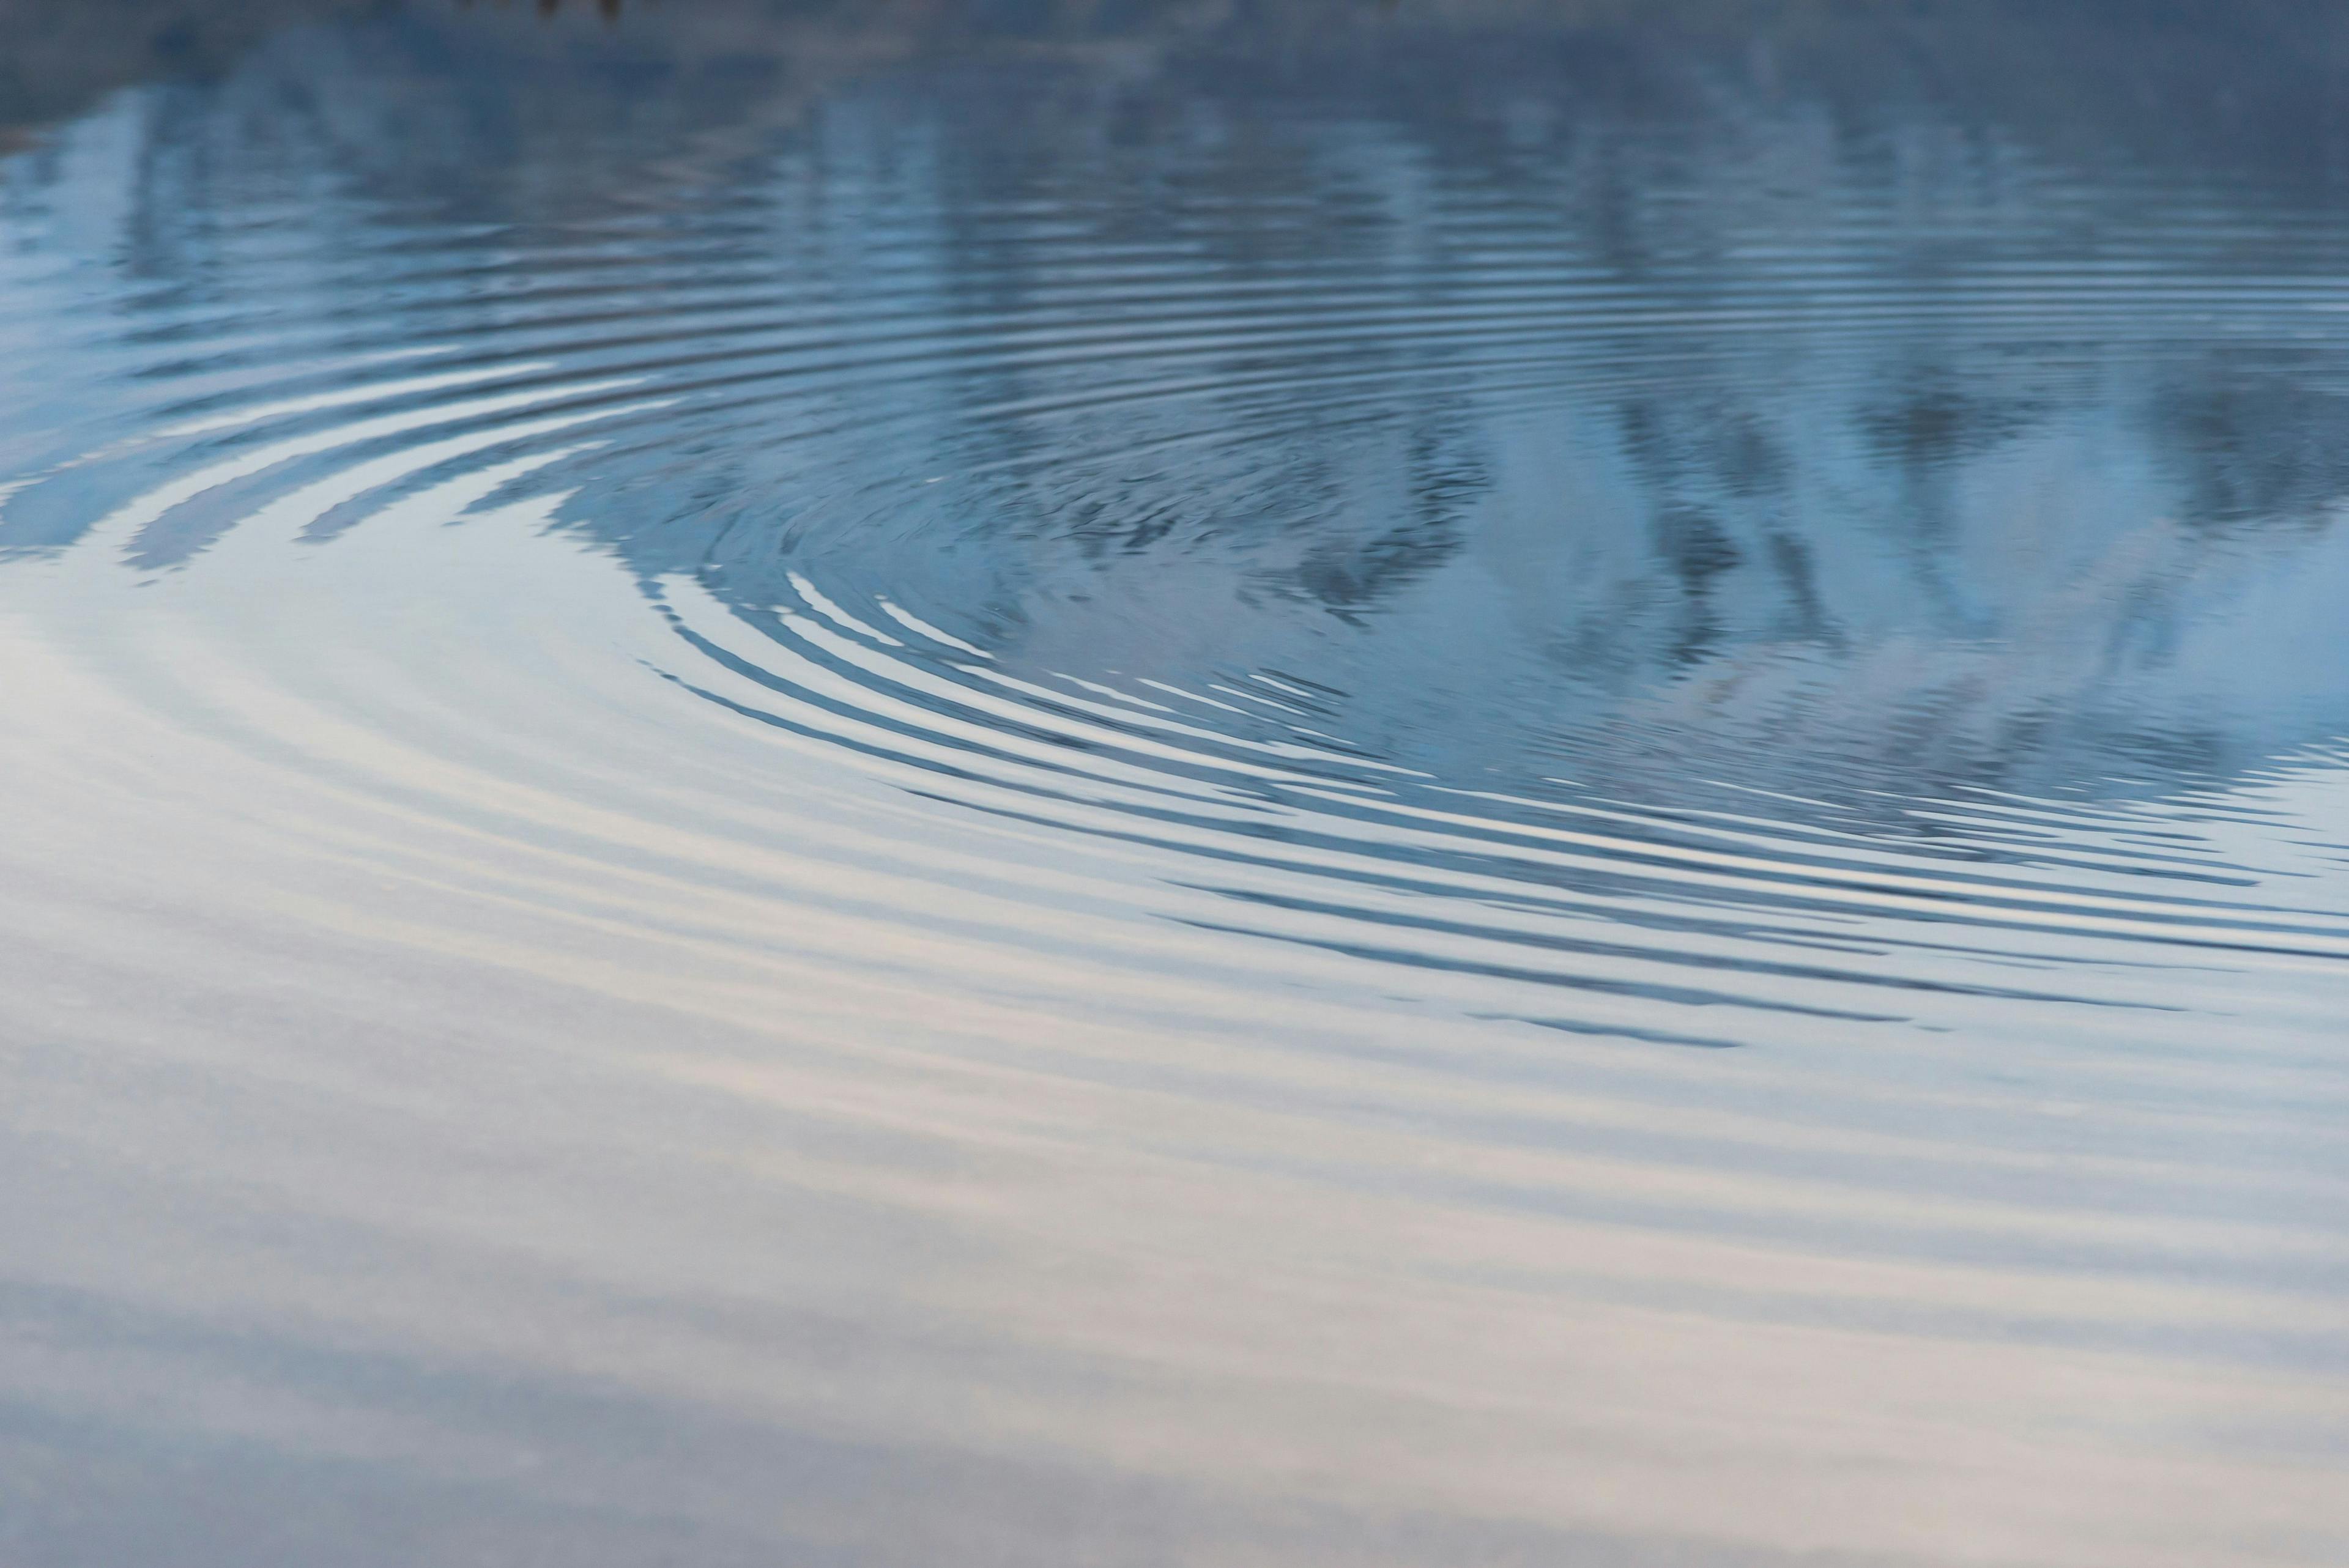 Ripples on a body of water